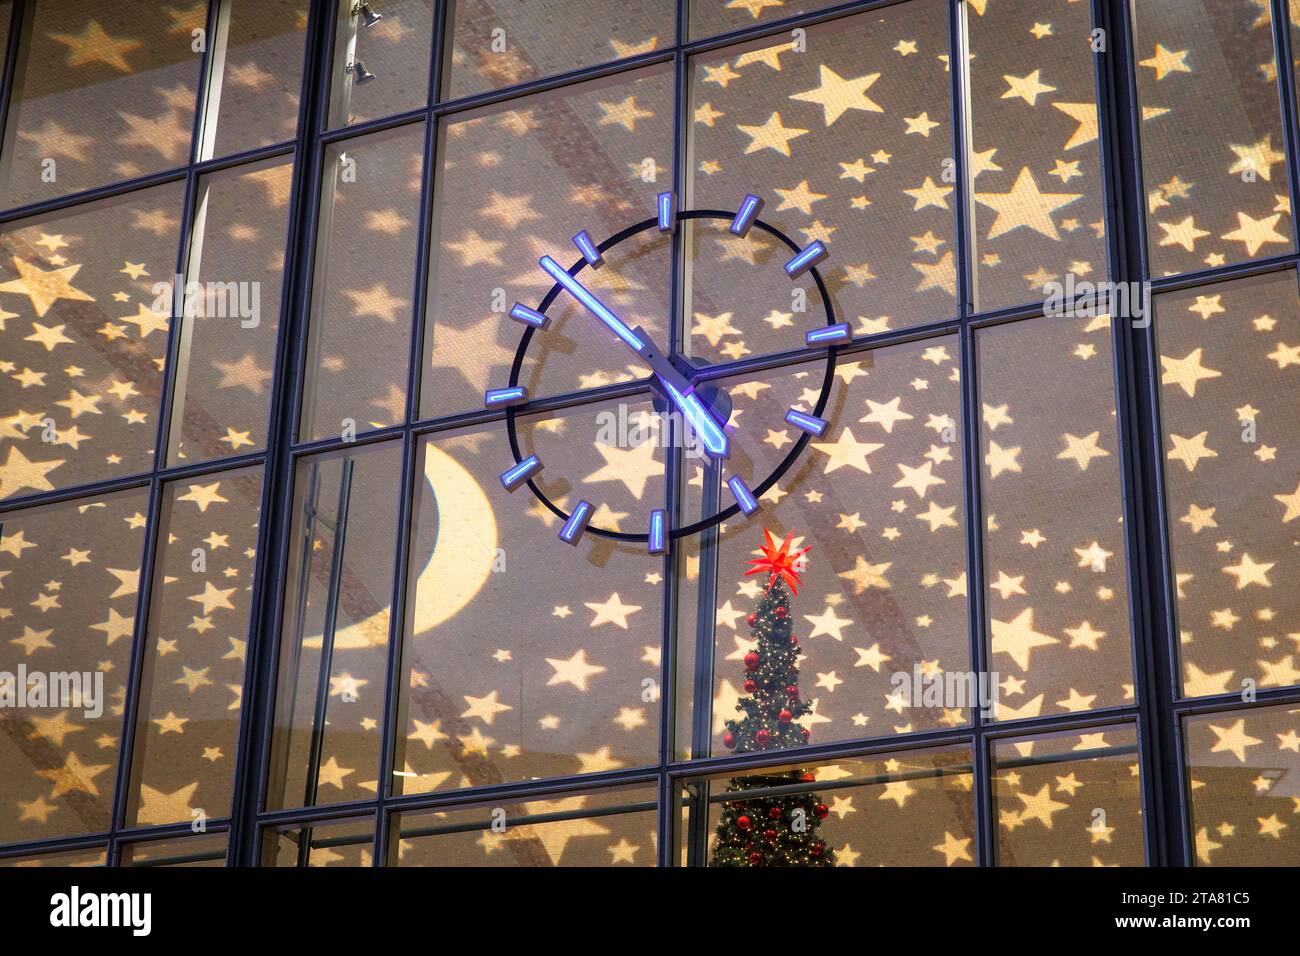 clock of the central station during Christmas time, Christmas illuminated ceiling, Cologne, Germany. Uhr am Hauptbahnhof waehrend der Weihnachtszeit, Stock Photo